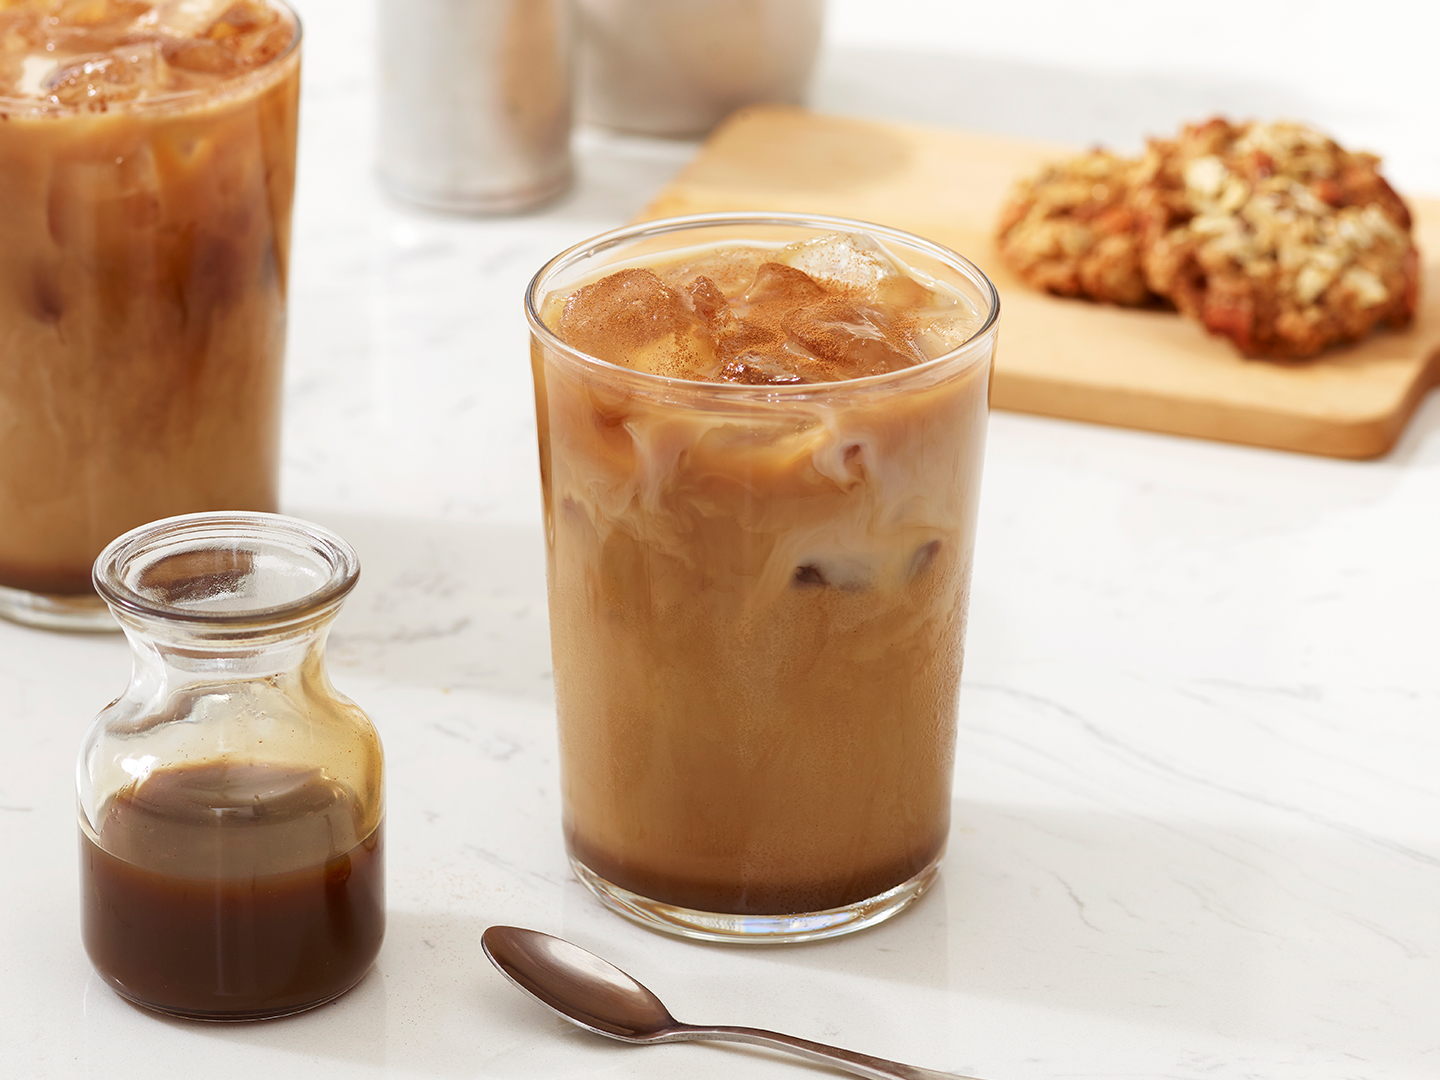 5 Minute Iced Coffee: How To Make Iced Coffee With A Keurig 